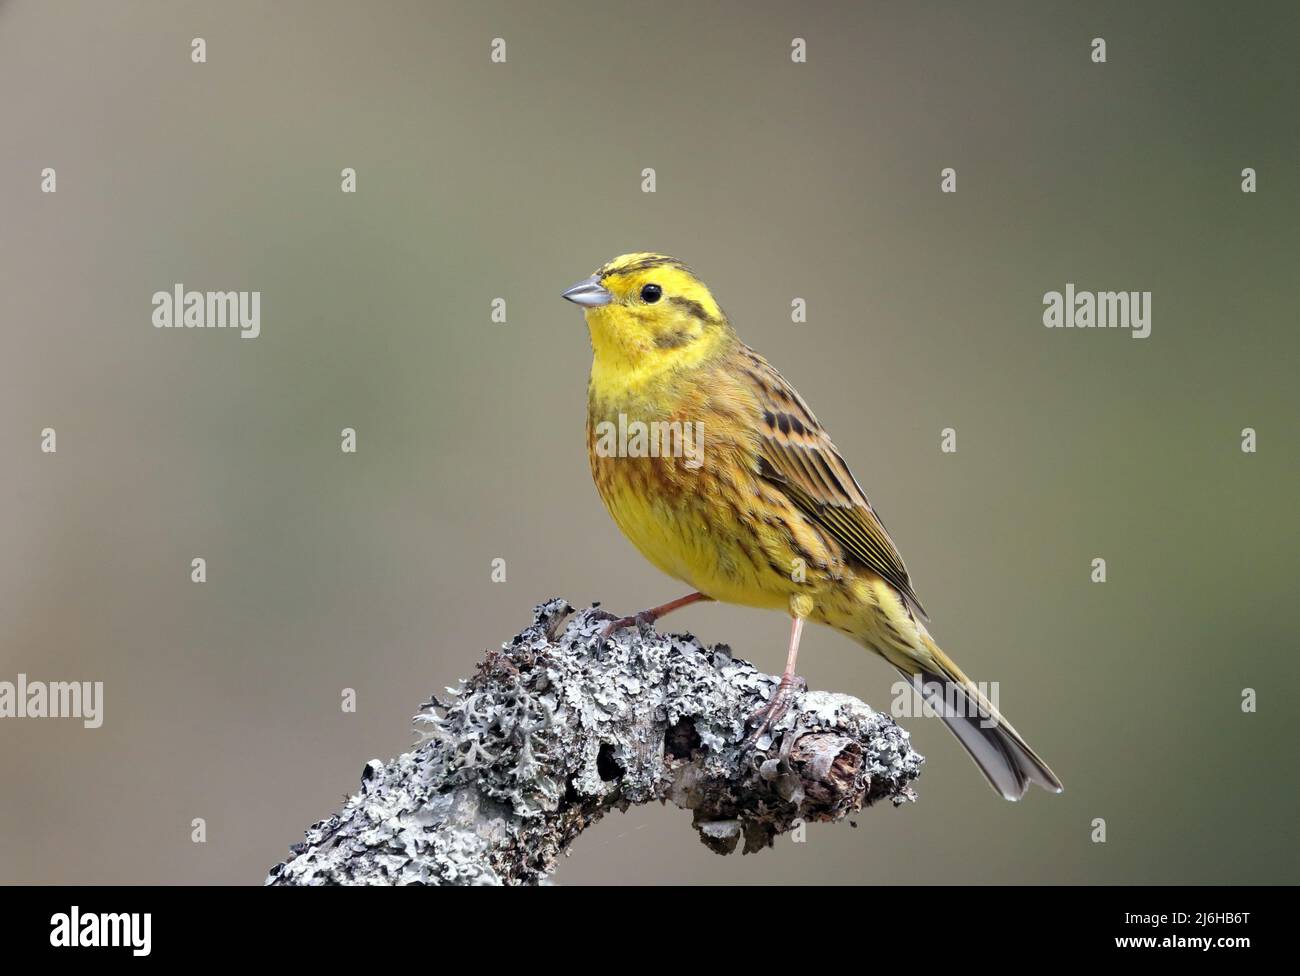 Yellowhammer, male, sitting on perch, close up Stock Photo